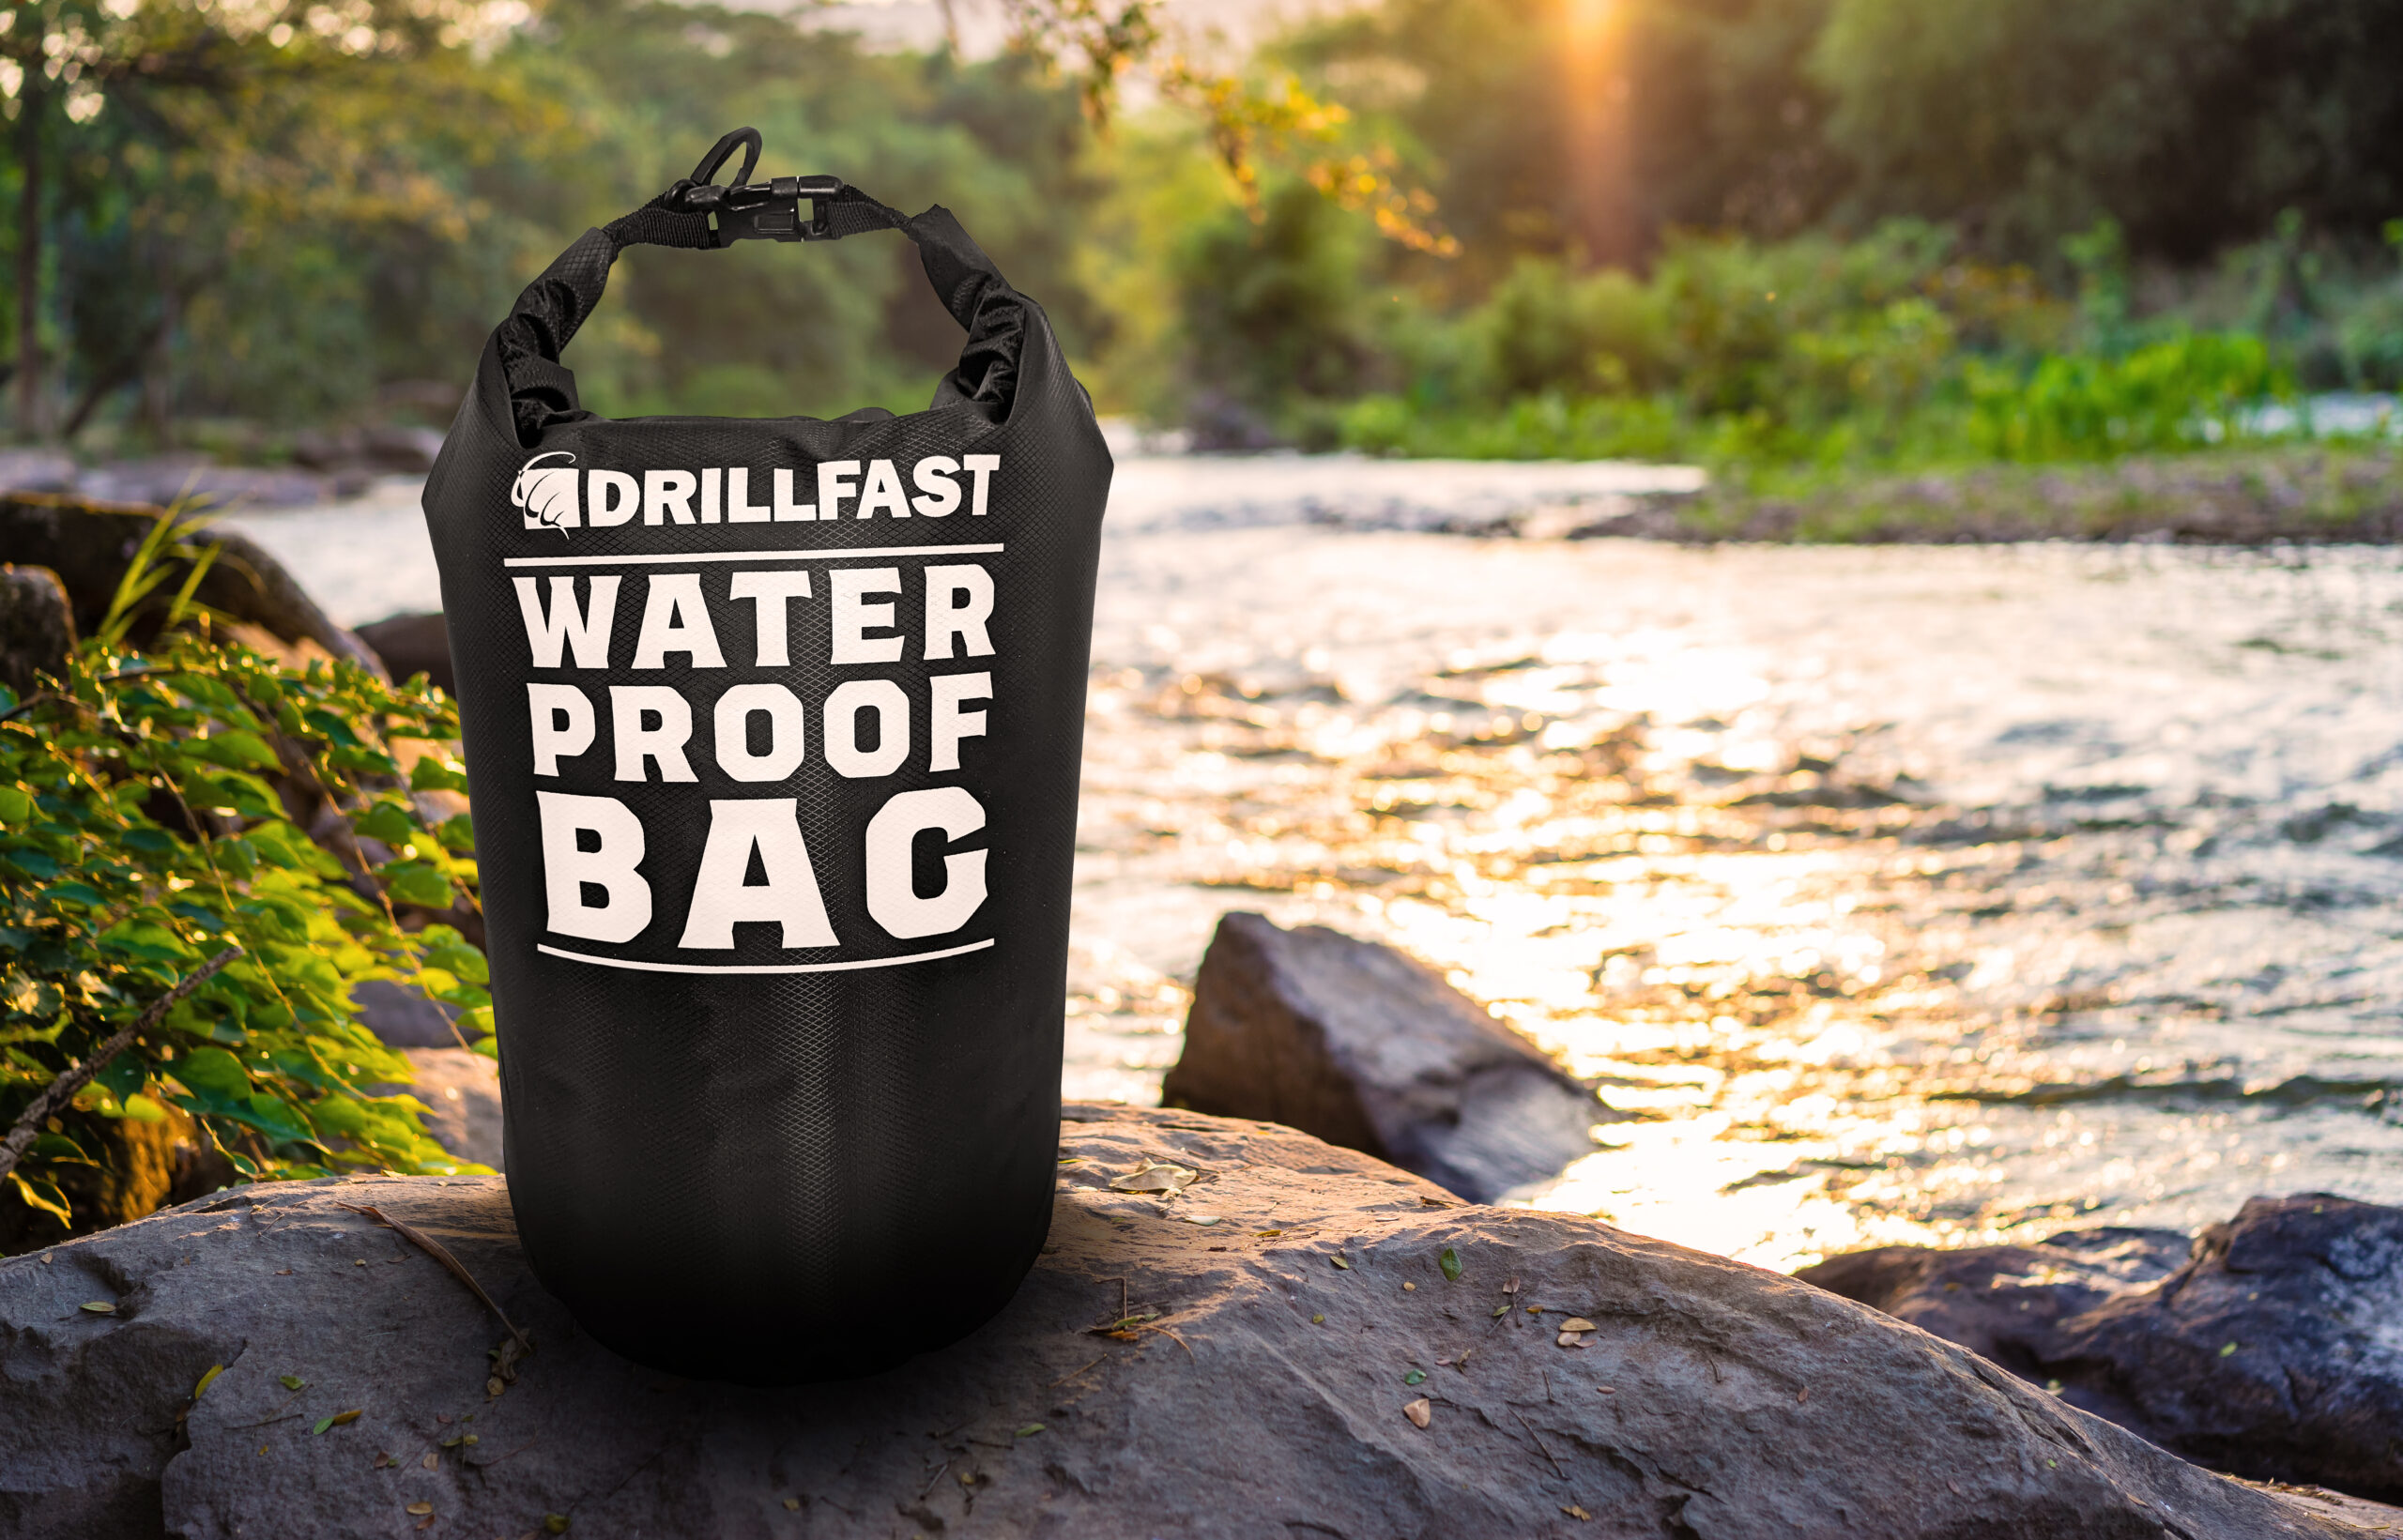 Drillfast Water Proof Bag